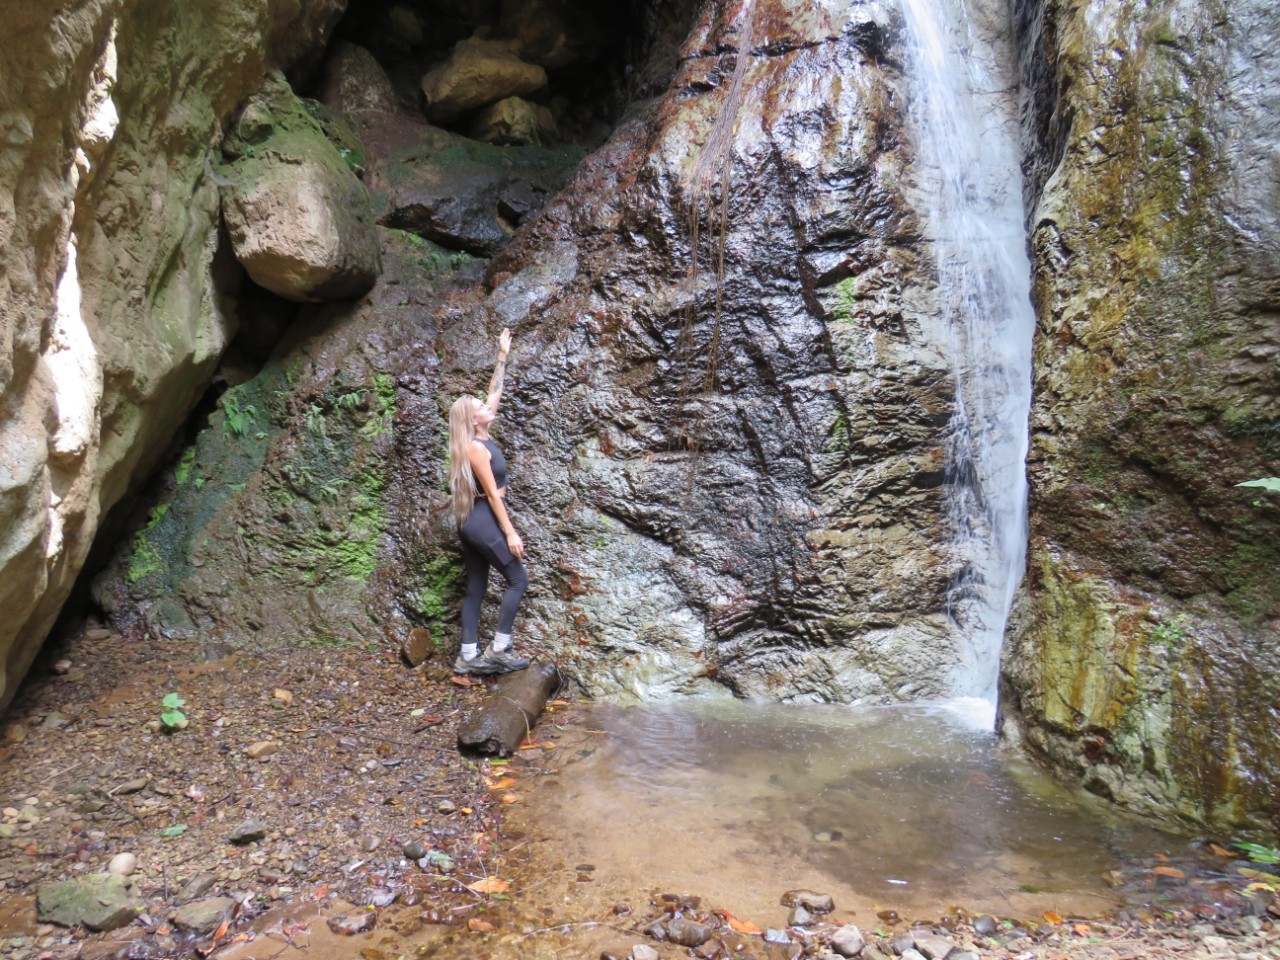 Cayla at a waterfall